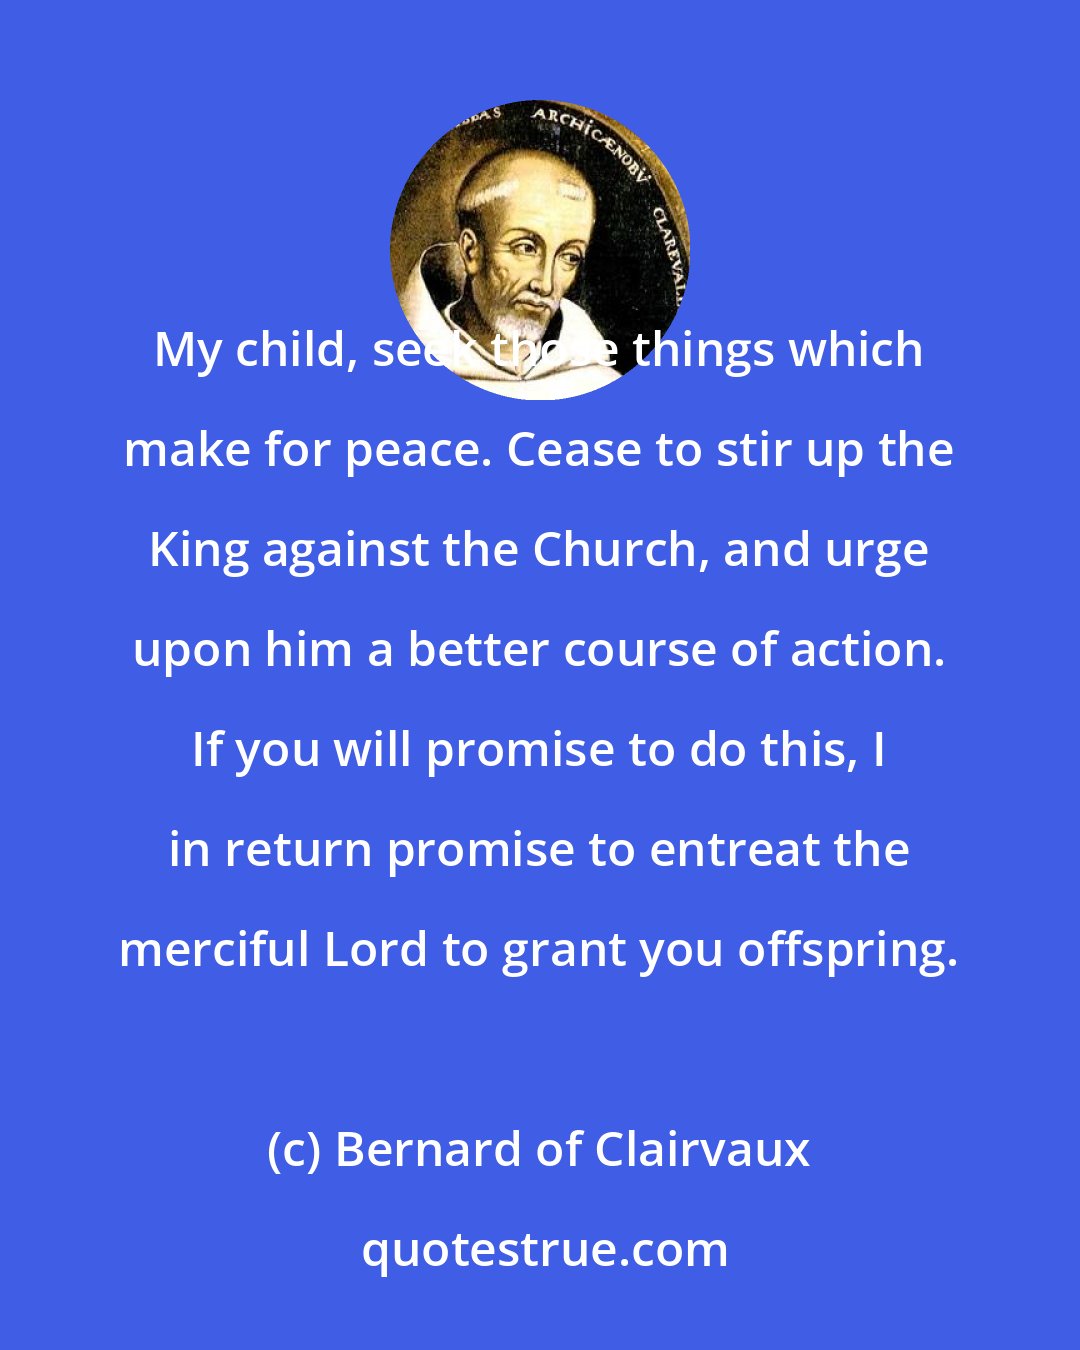 Bernard of Clairvaux: My child, seek those things which make for peace. Cease to stir up the King against the Church, and urge upon him a better course of action. If you will promise to do this, I in return promise to entreat the merciful Lord to grant you offspring.